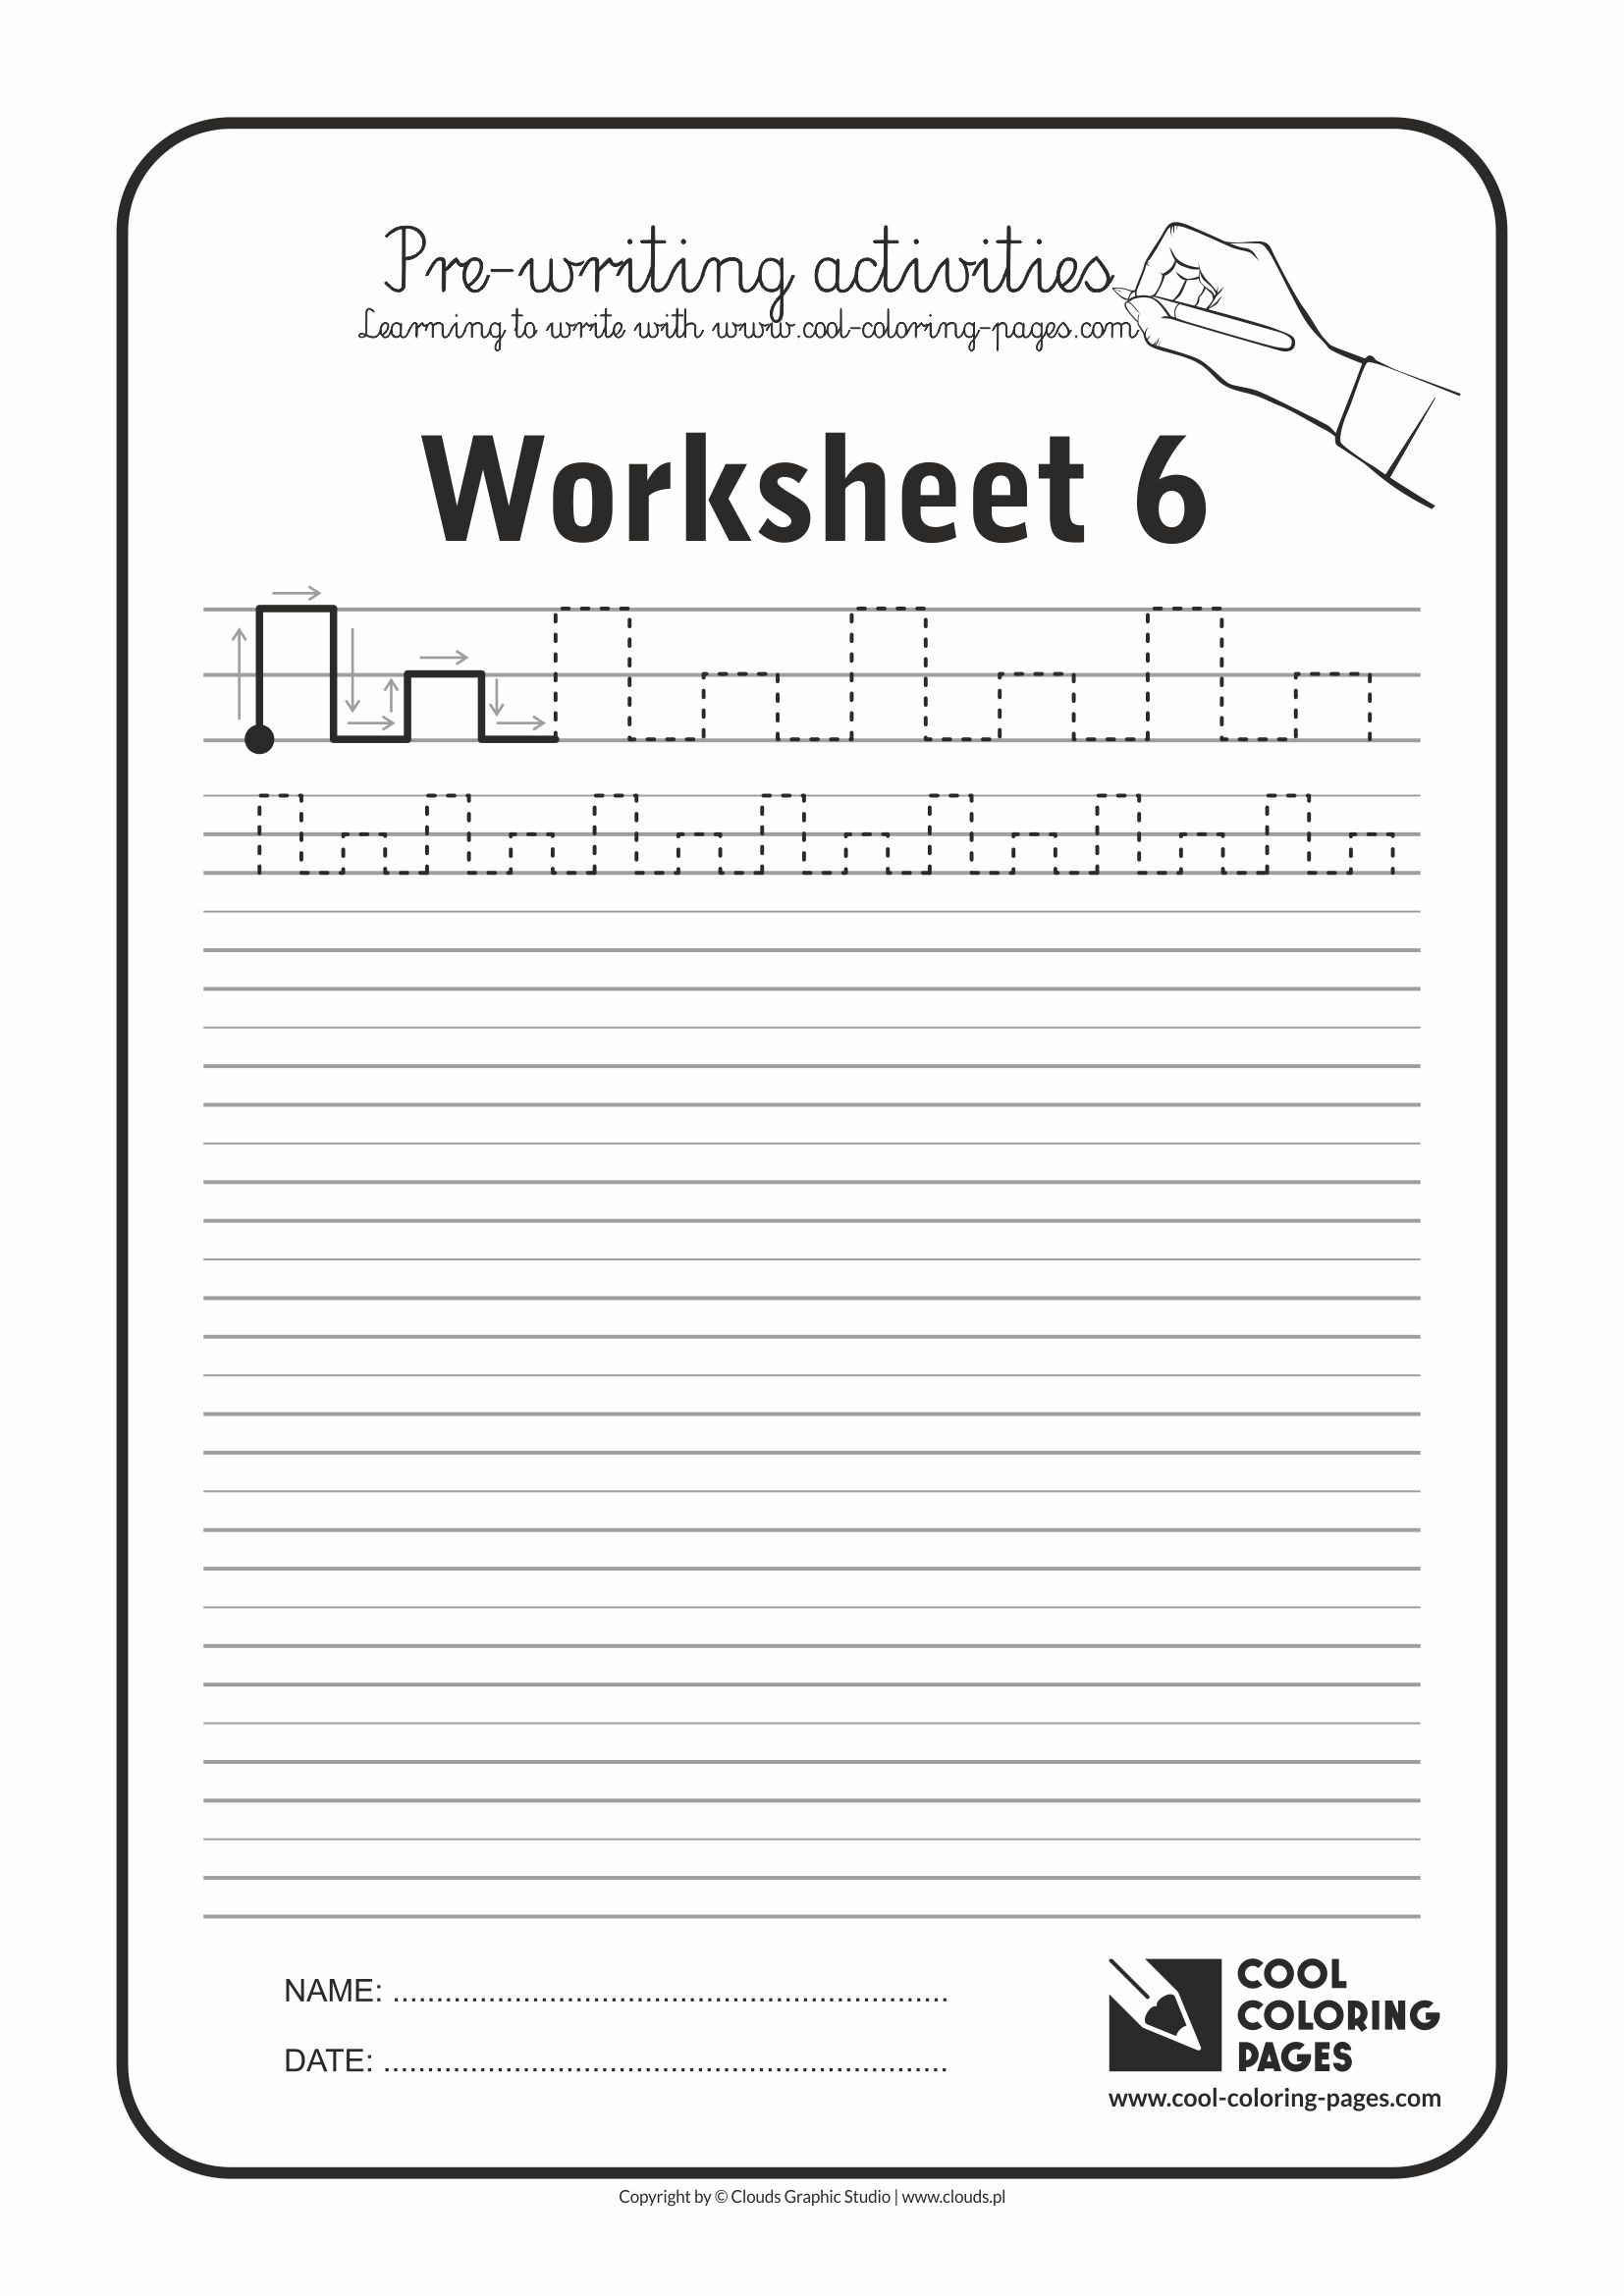 Cool Coloring Pages / Pre-writing activities / Worksheet no.6